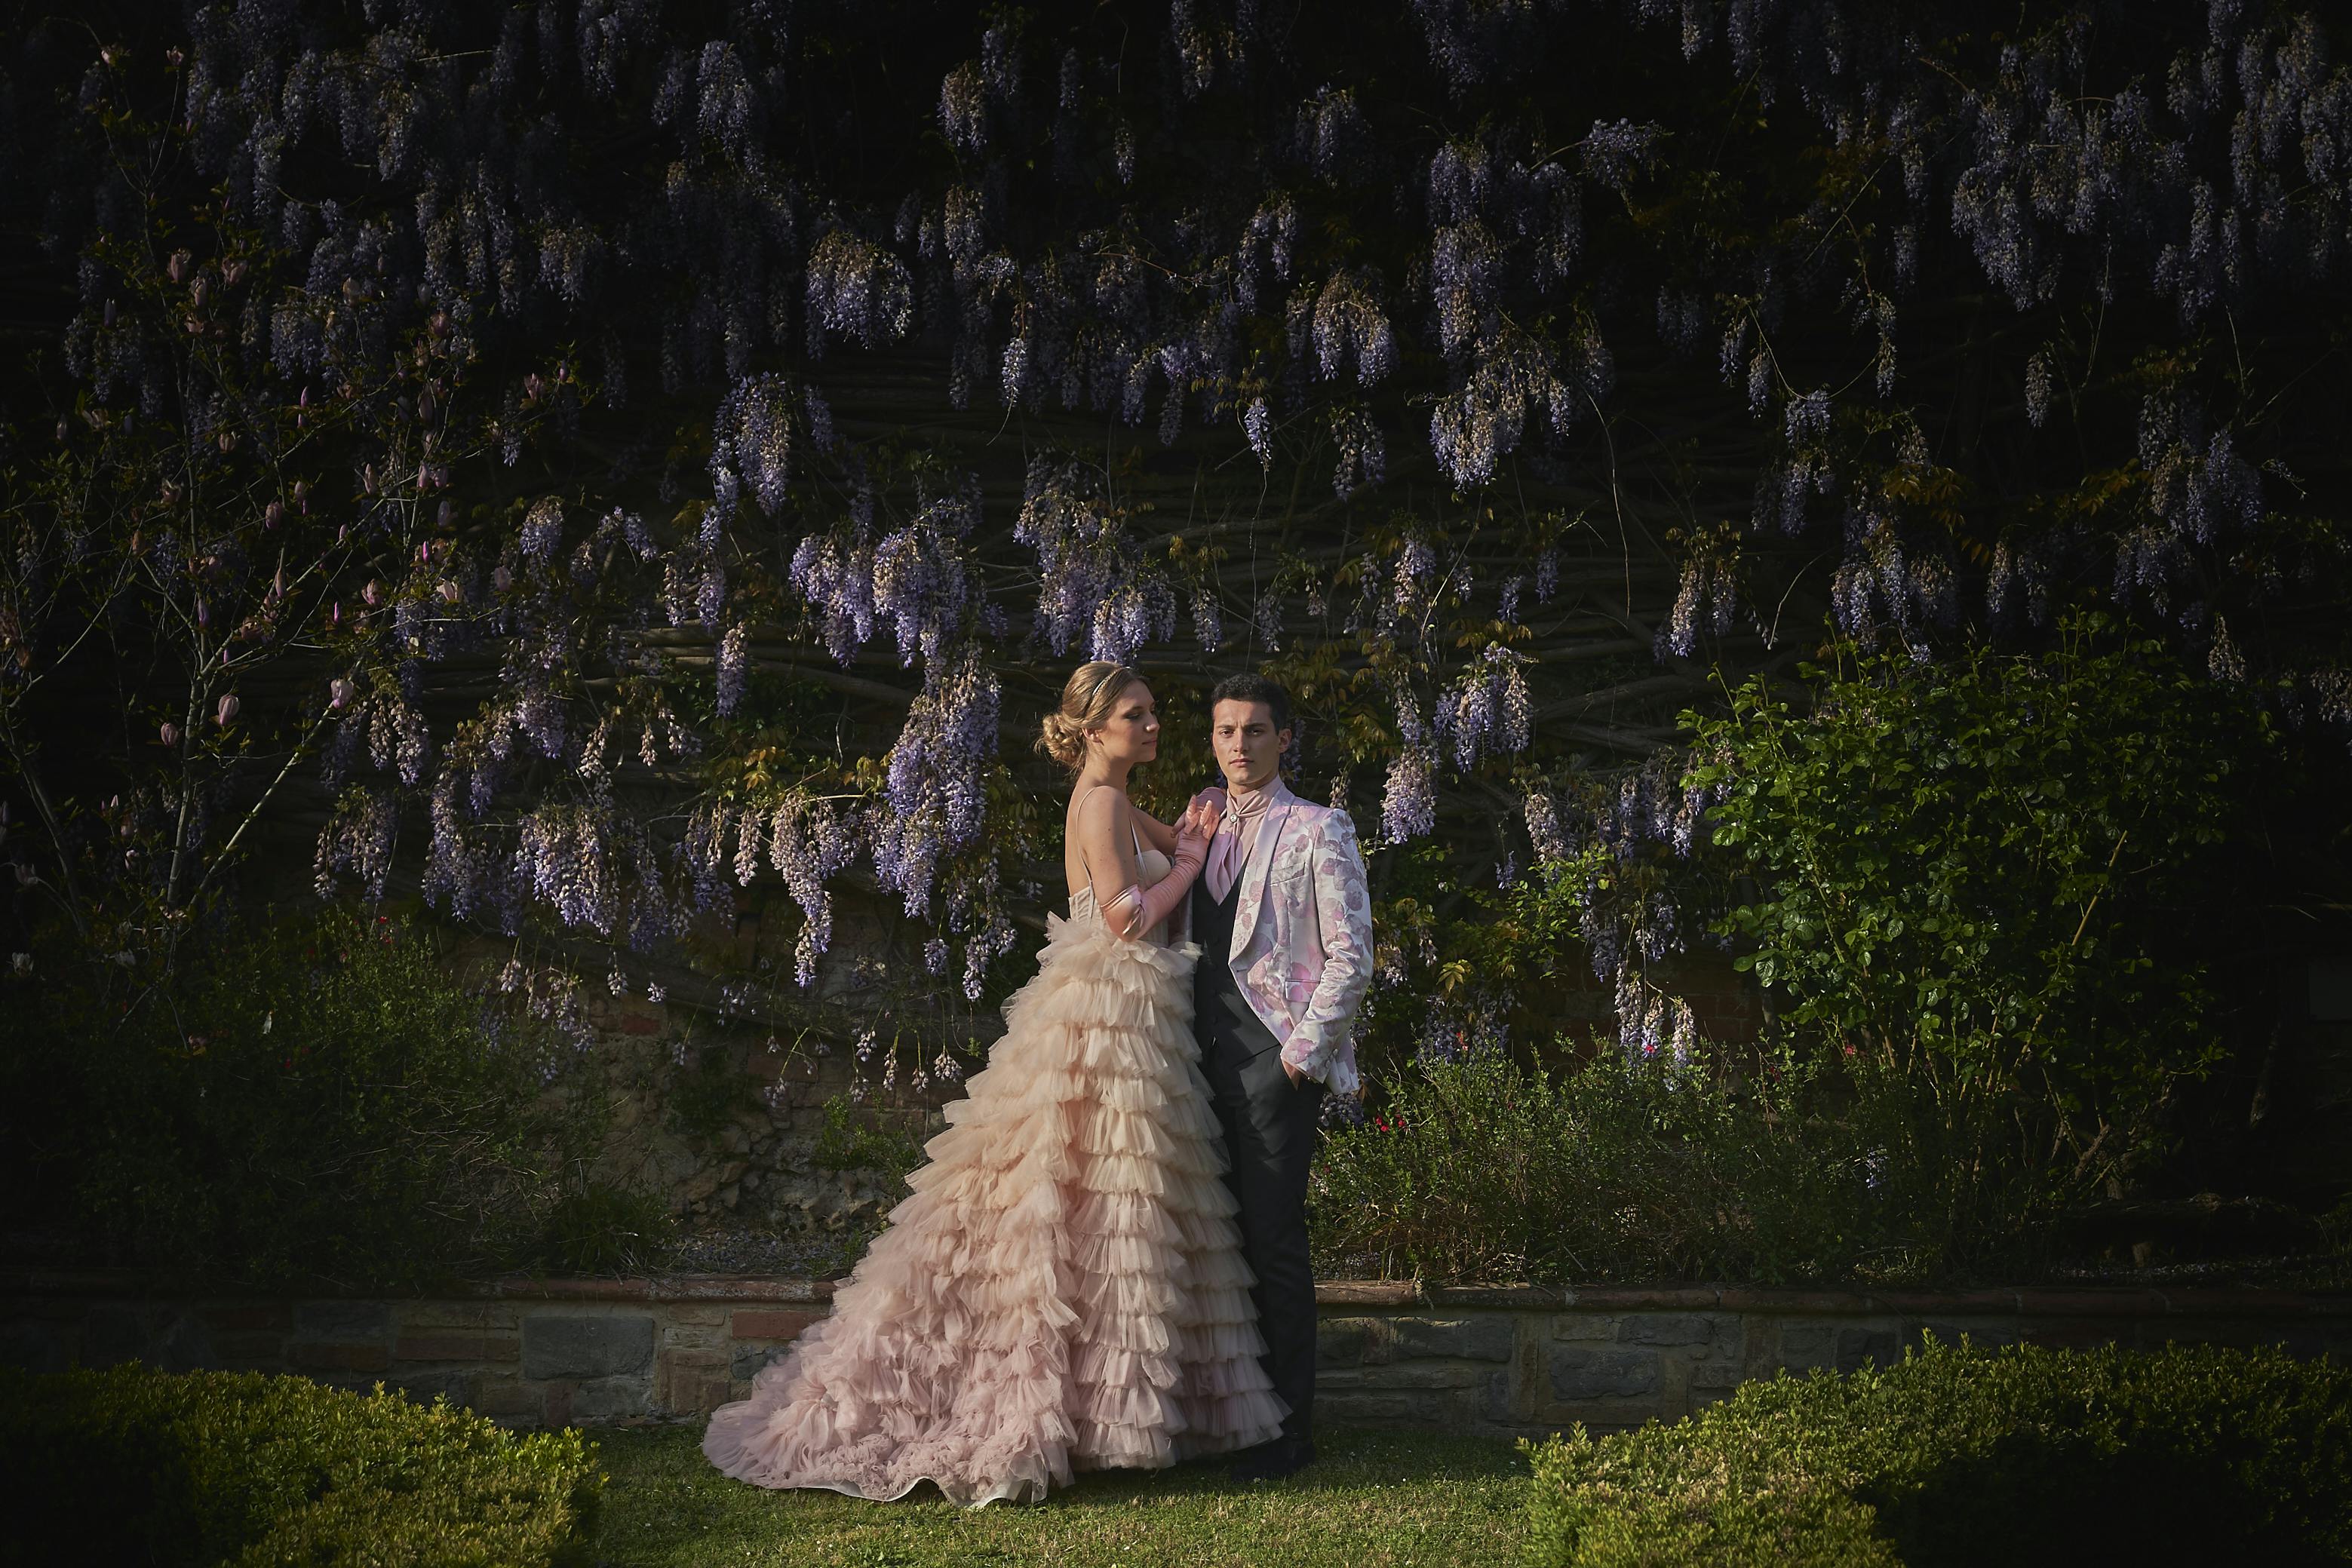 bride and groom dressed in fashion wedding dresses in front of a wall of wisteria plantsll of